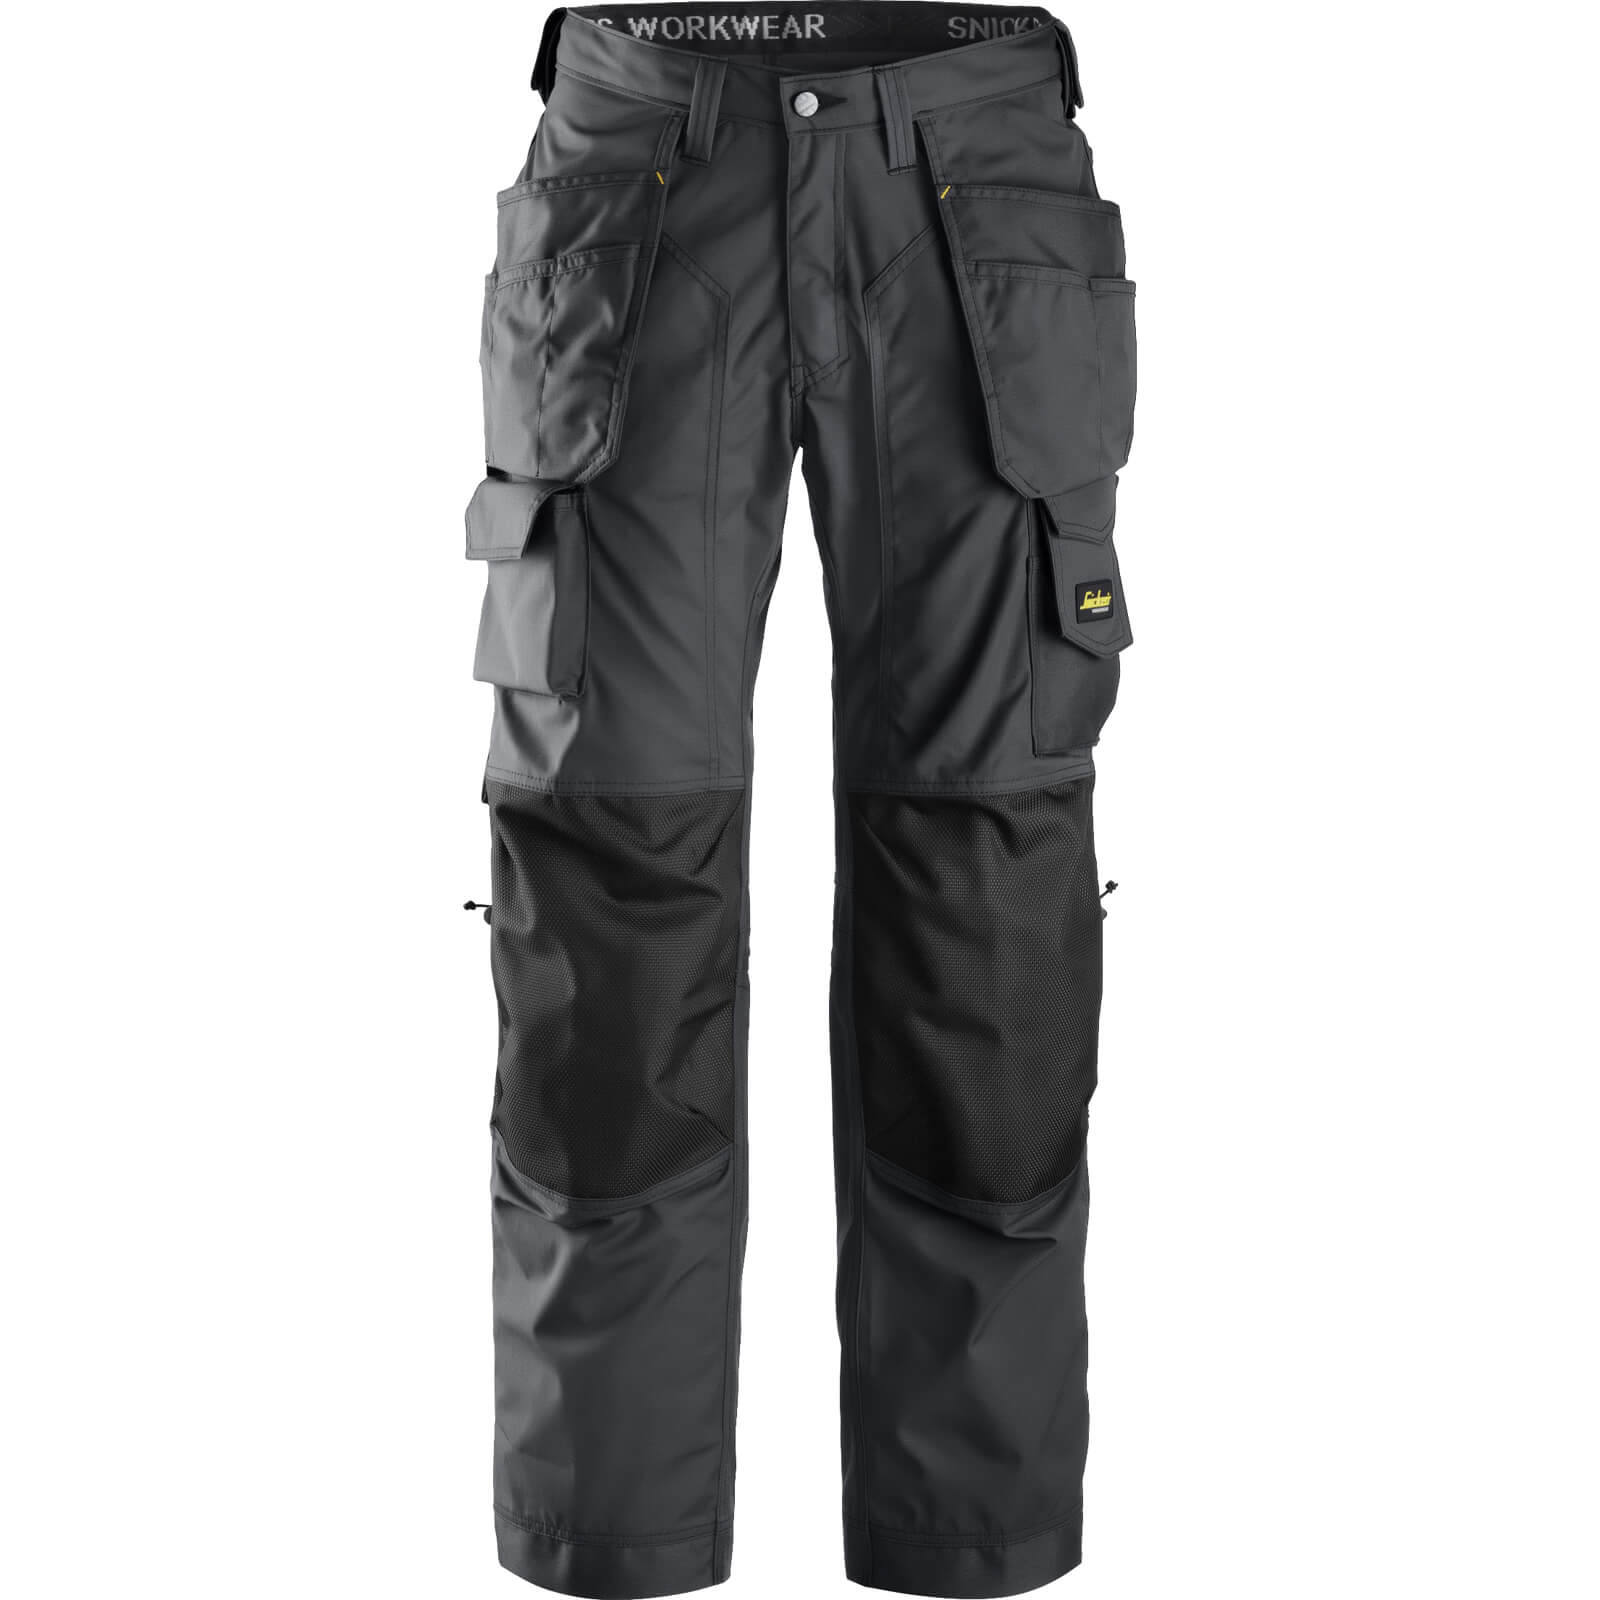 Image of Snickers 3223 Mens Rip Stop Floor Layer Work Trousers Black / Grey 30" 35"